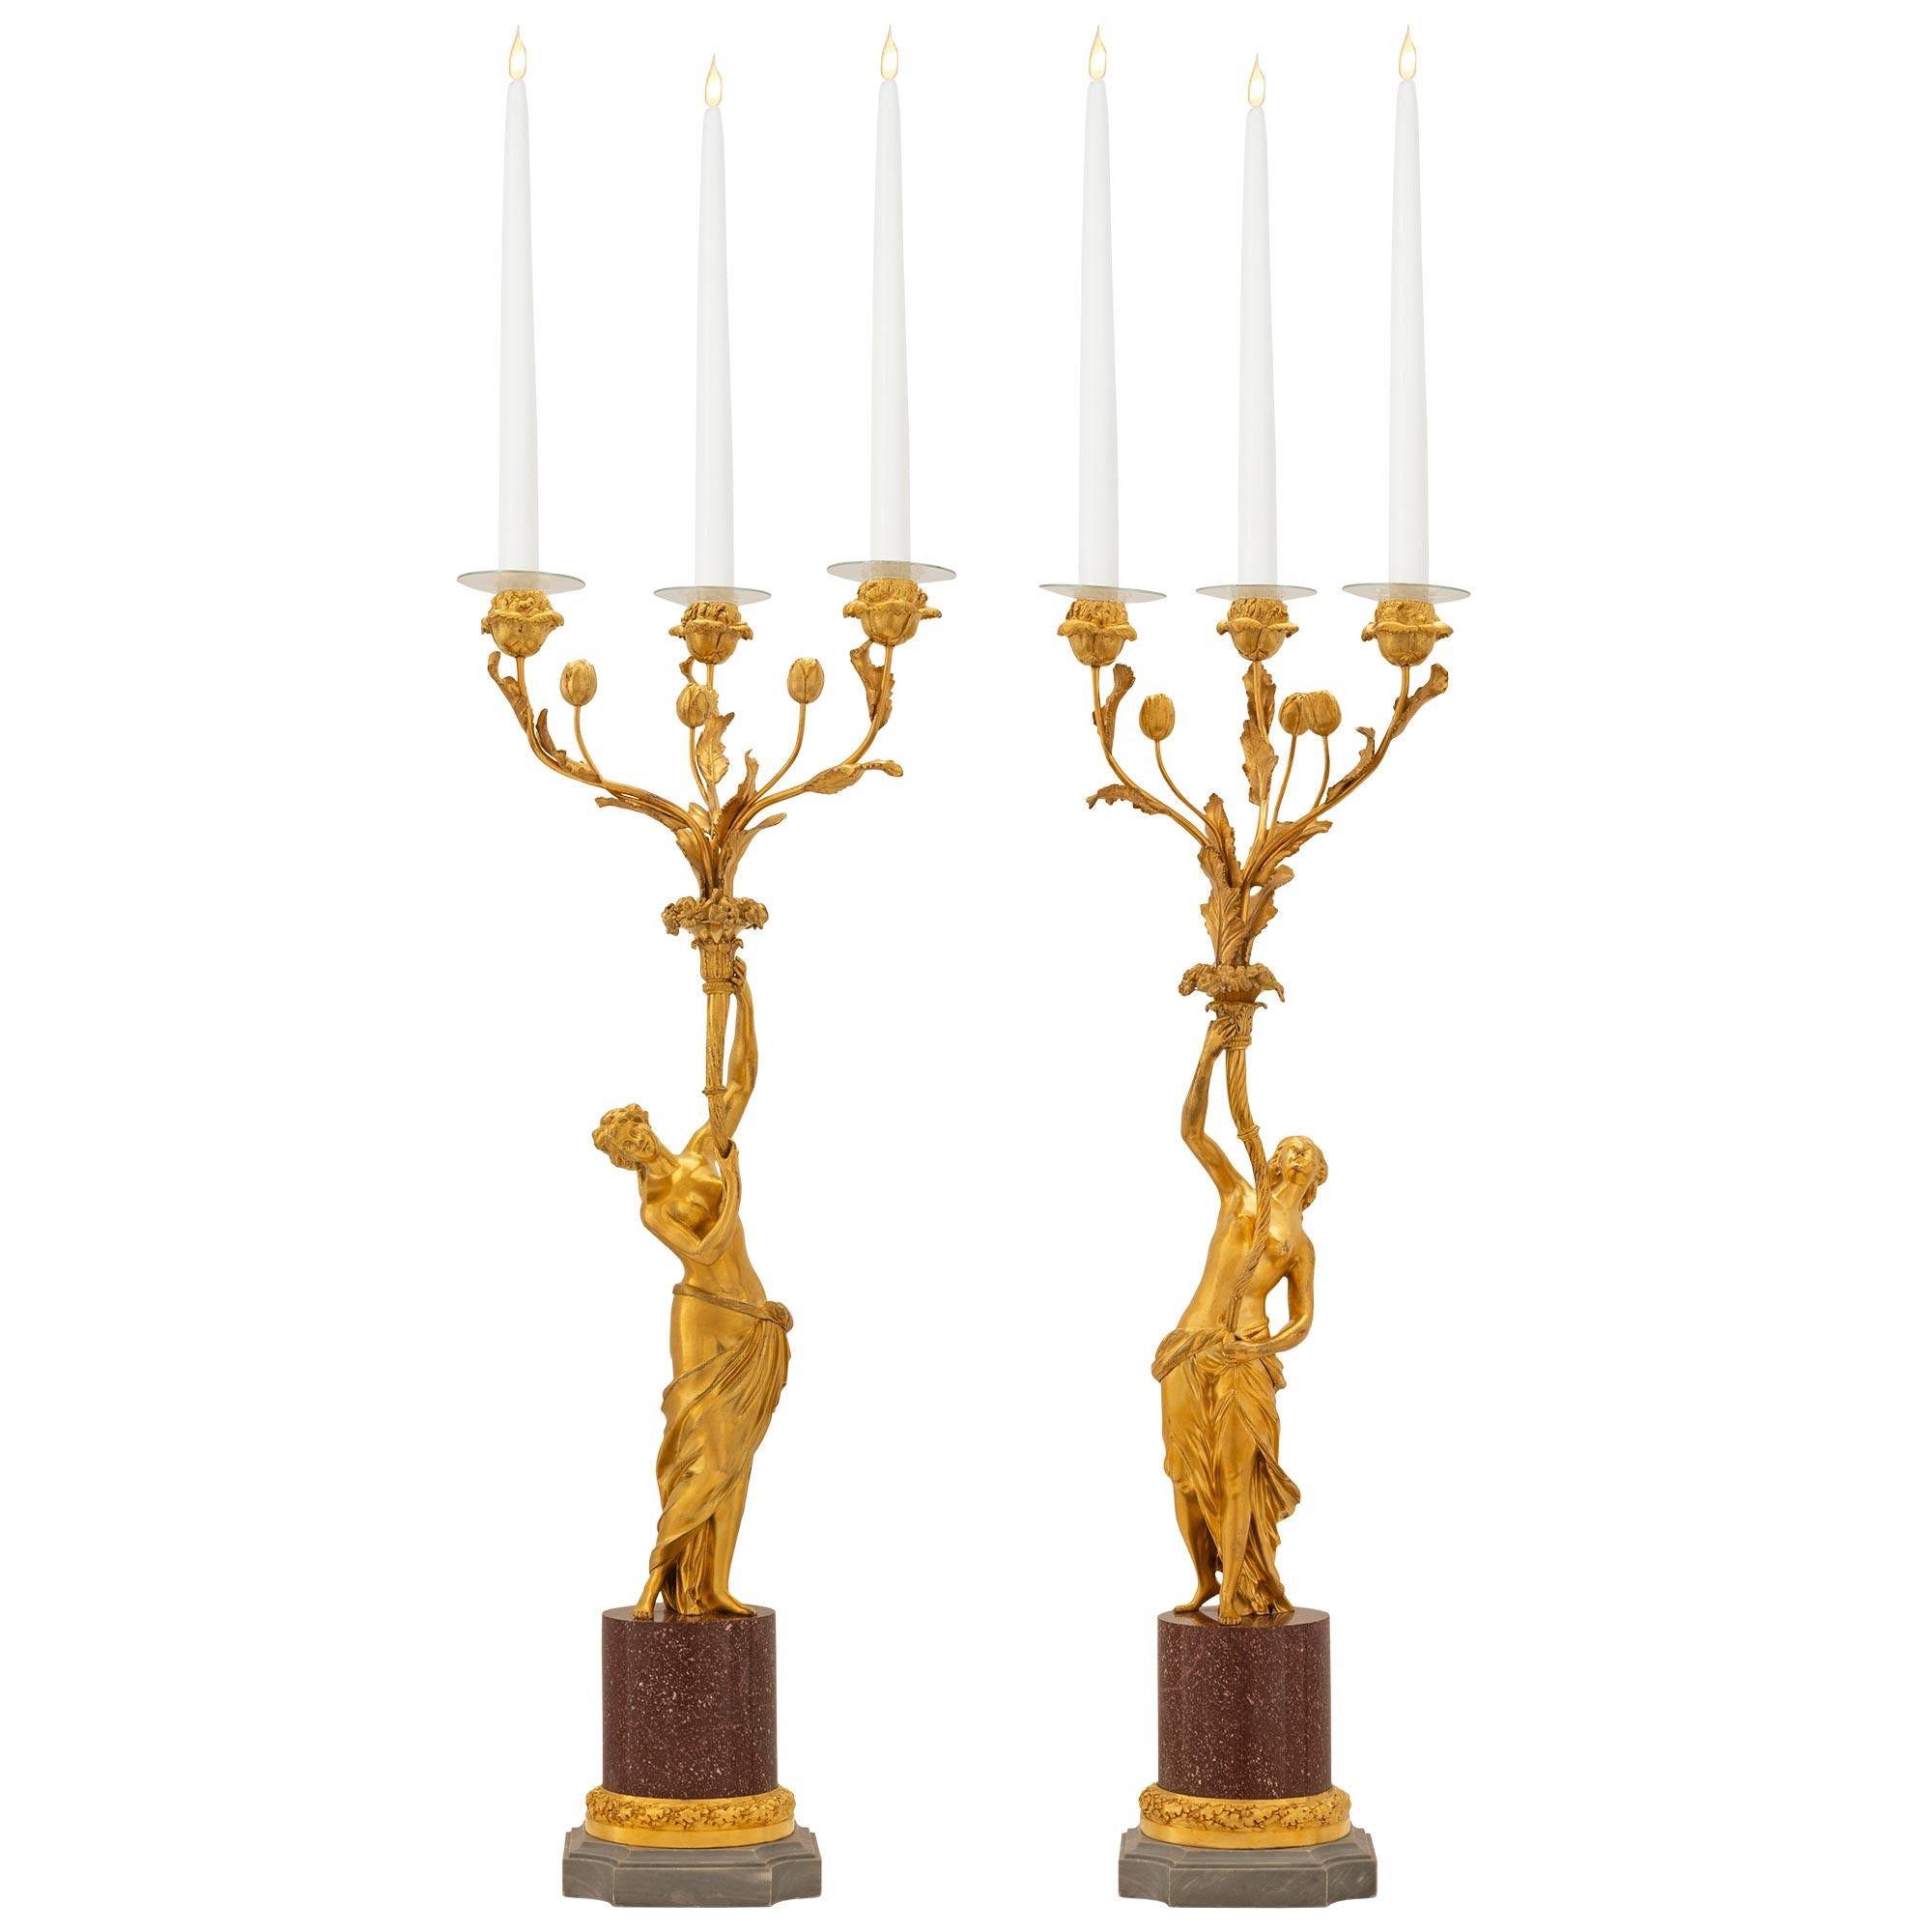 Pair of 19th Century Louis XVI Style Ormolu, Marble and Porphyry Candelabras For Sale 6